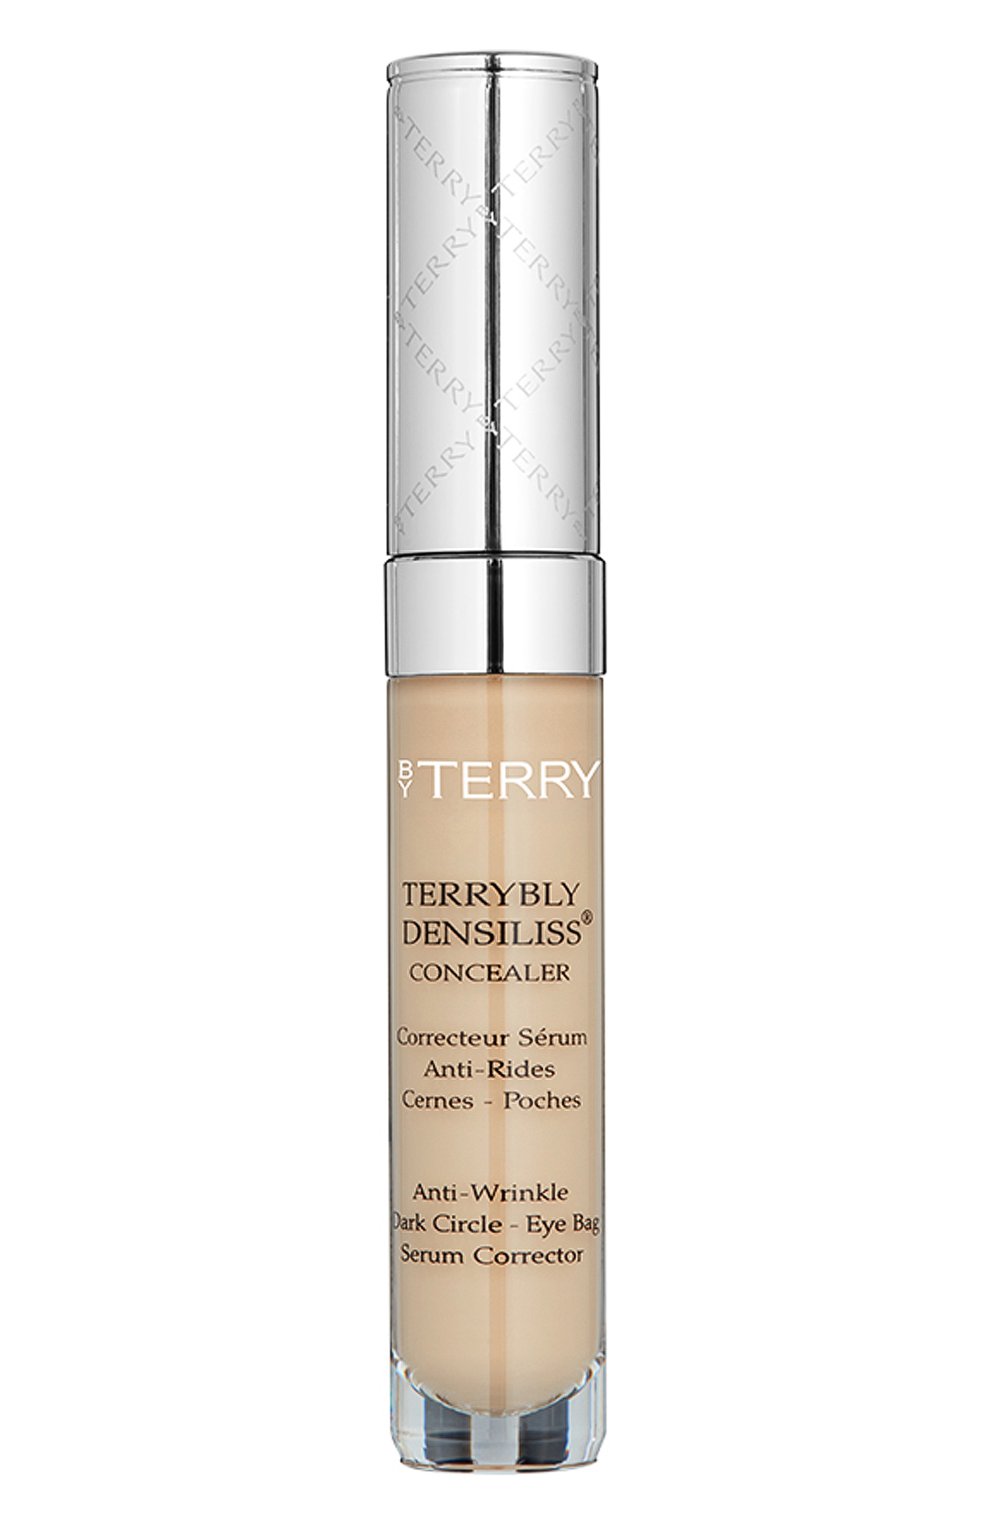 Консилер terrybly densiliss concealer, 3 natural beige (7ml) BY TERRY  цвета, арт. V19121003 | Фото 3